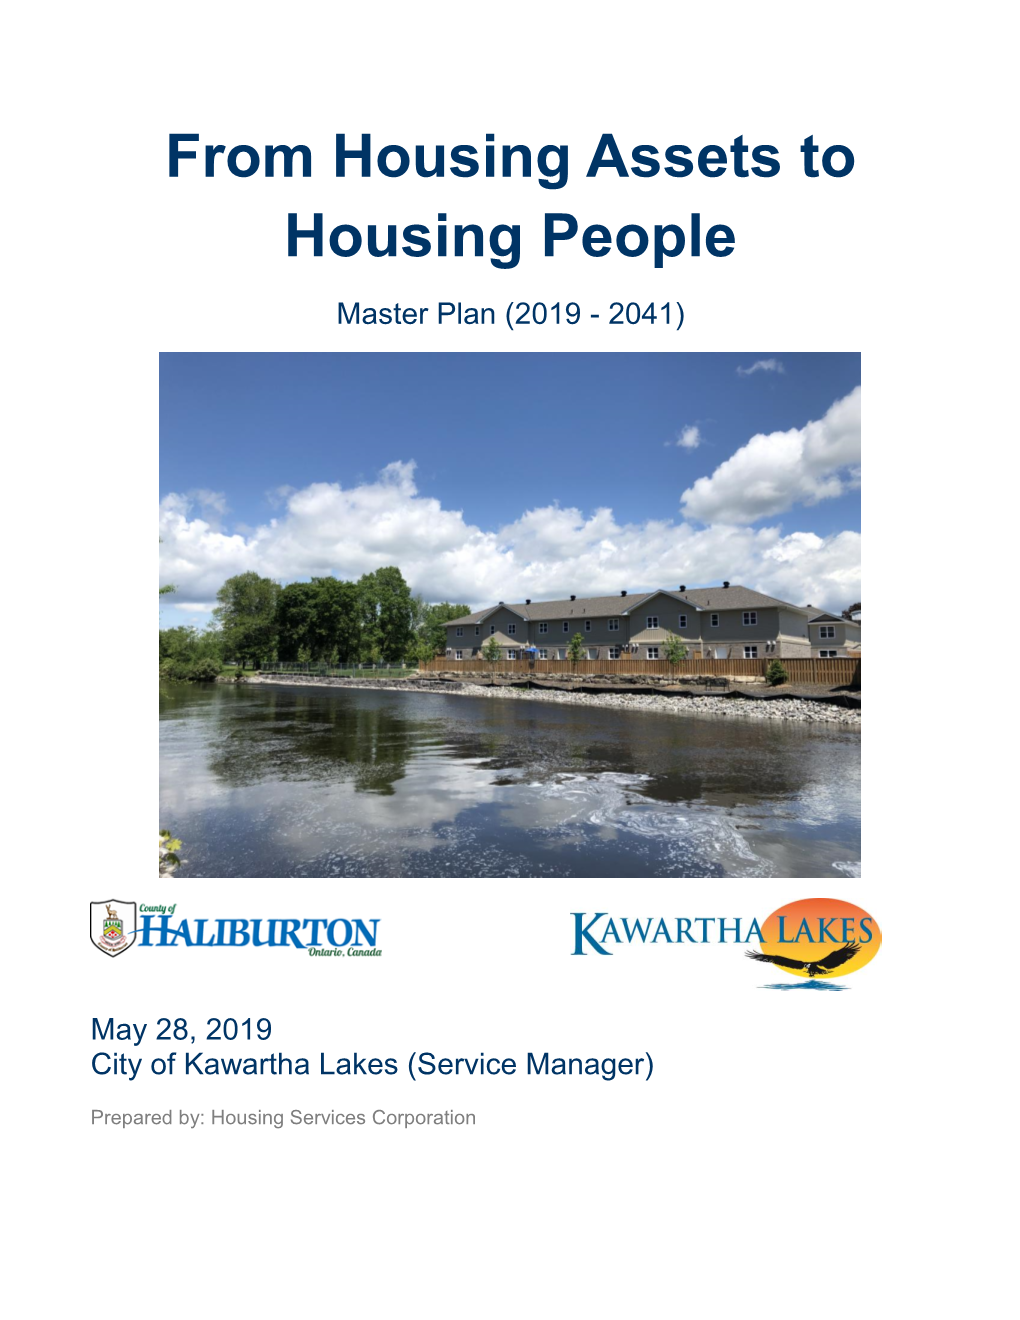 From Housing Assets to Housing People